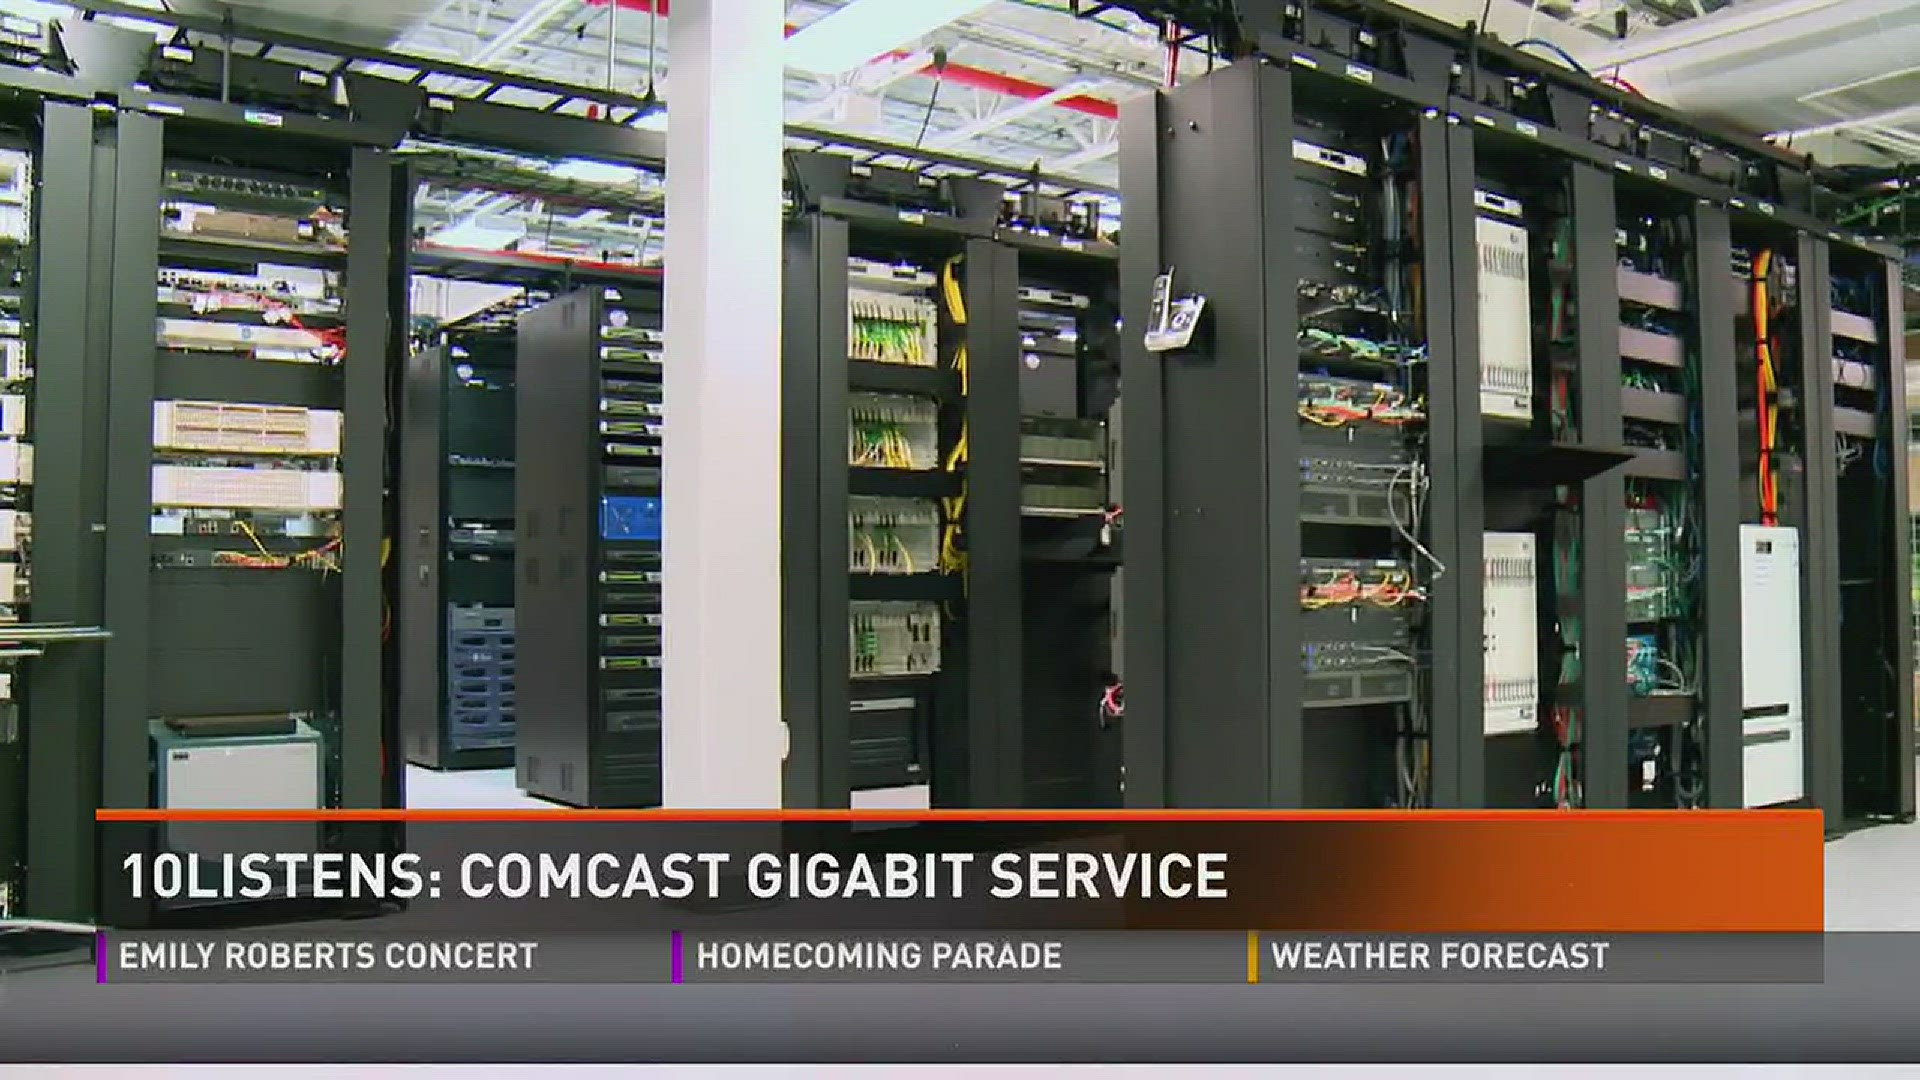 Nov. 4, 2016: Comcast is rolling out a new high speed internet service in Knoxville.